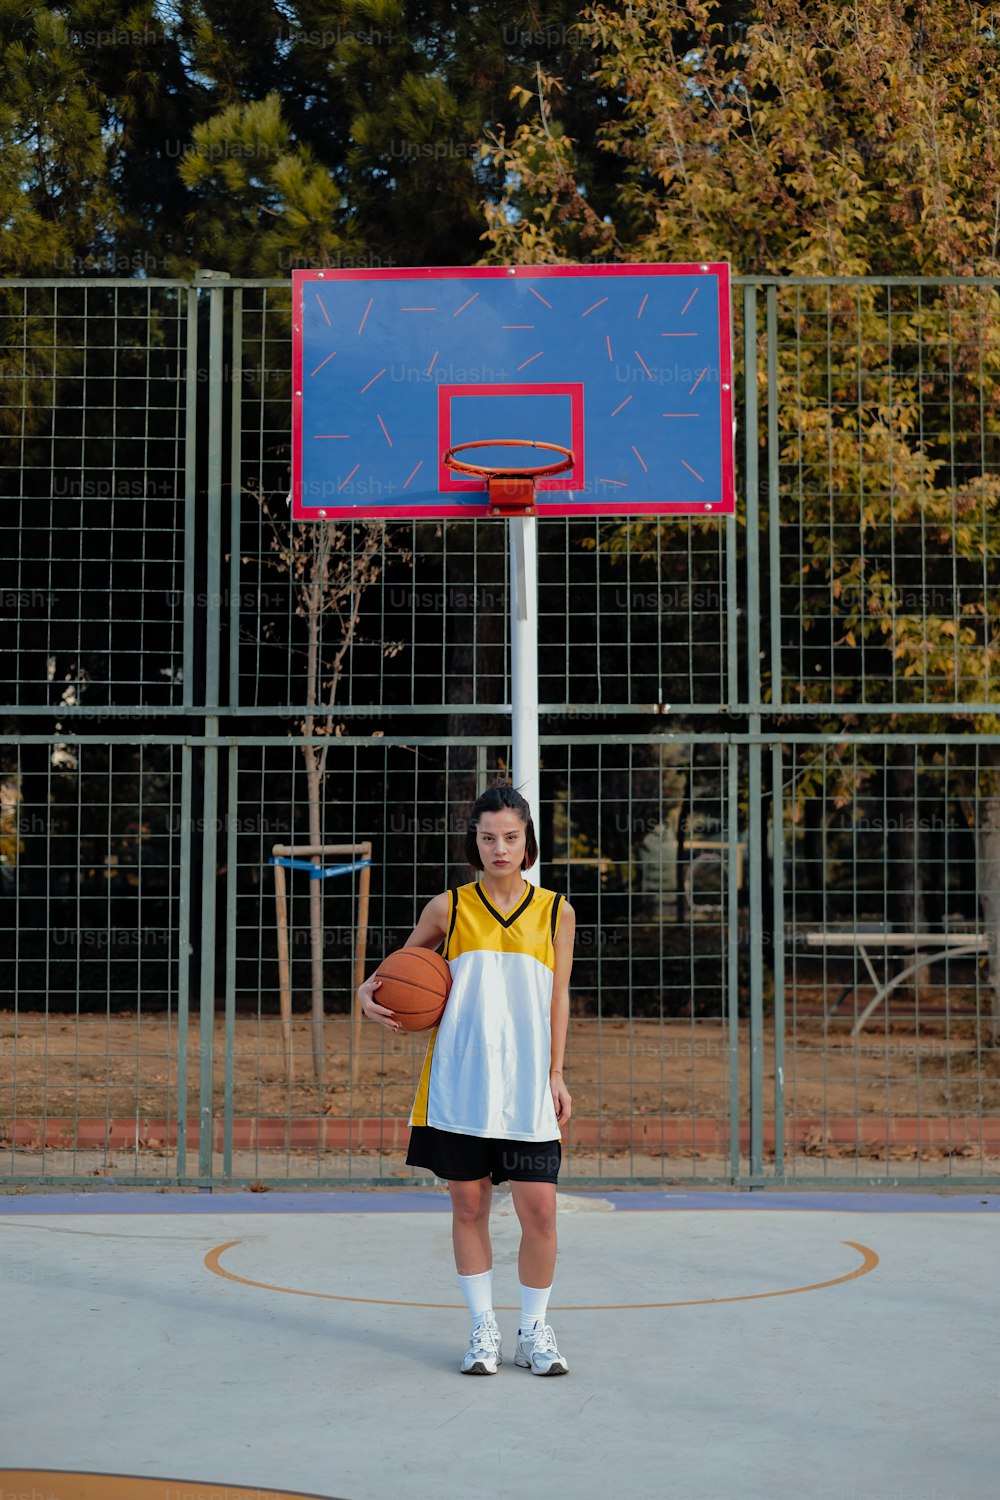 a young woman holding a basketball on a basketball court